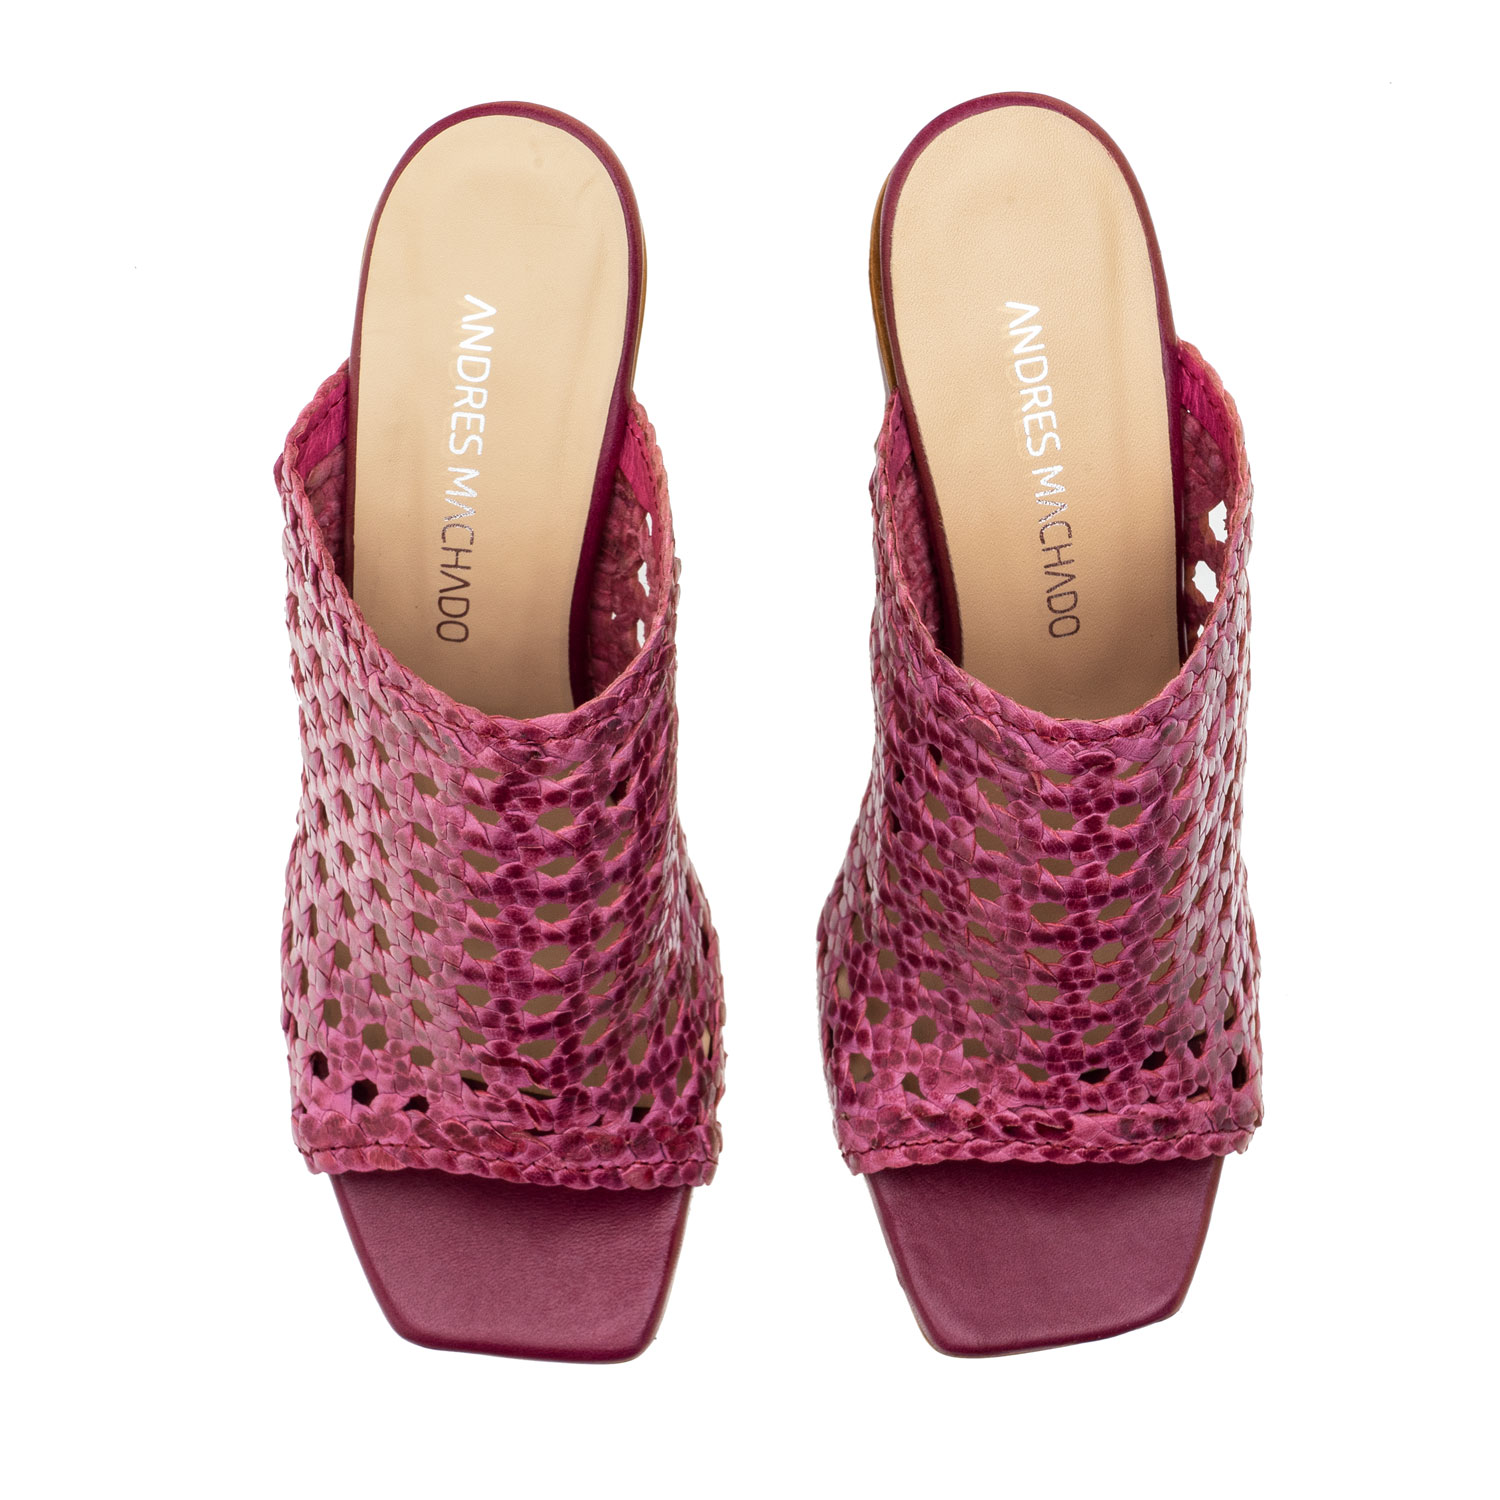 Braided Mules in Raspberry Leather 